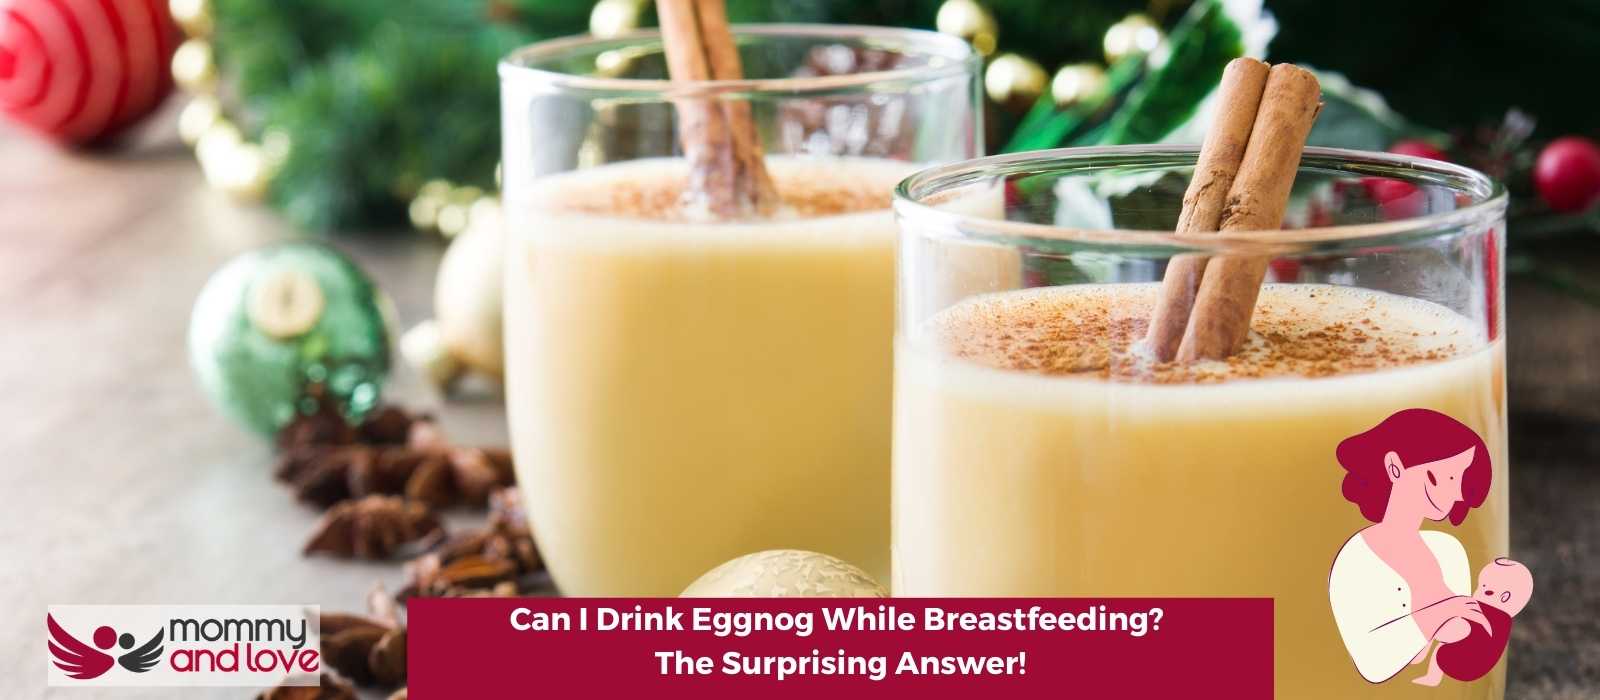 Can I Drink Eggnog While Breastfeeding The Surprising Answer!